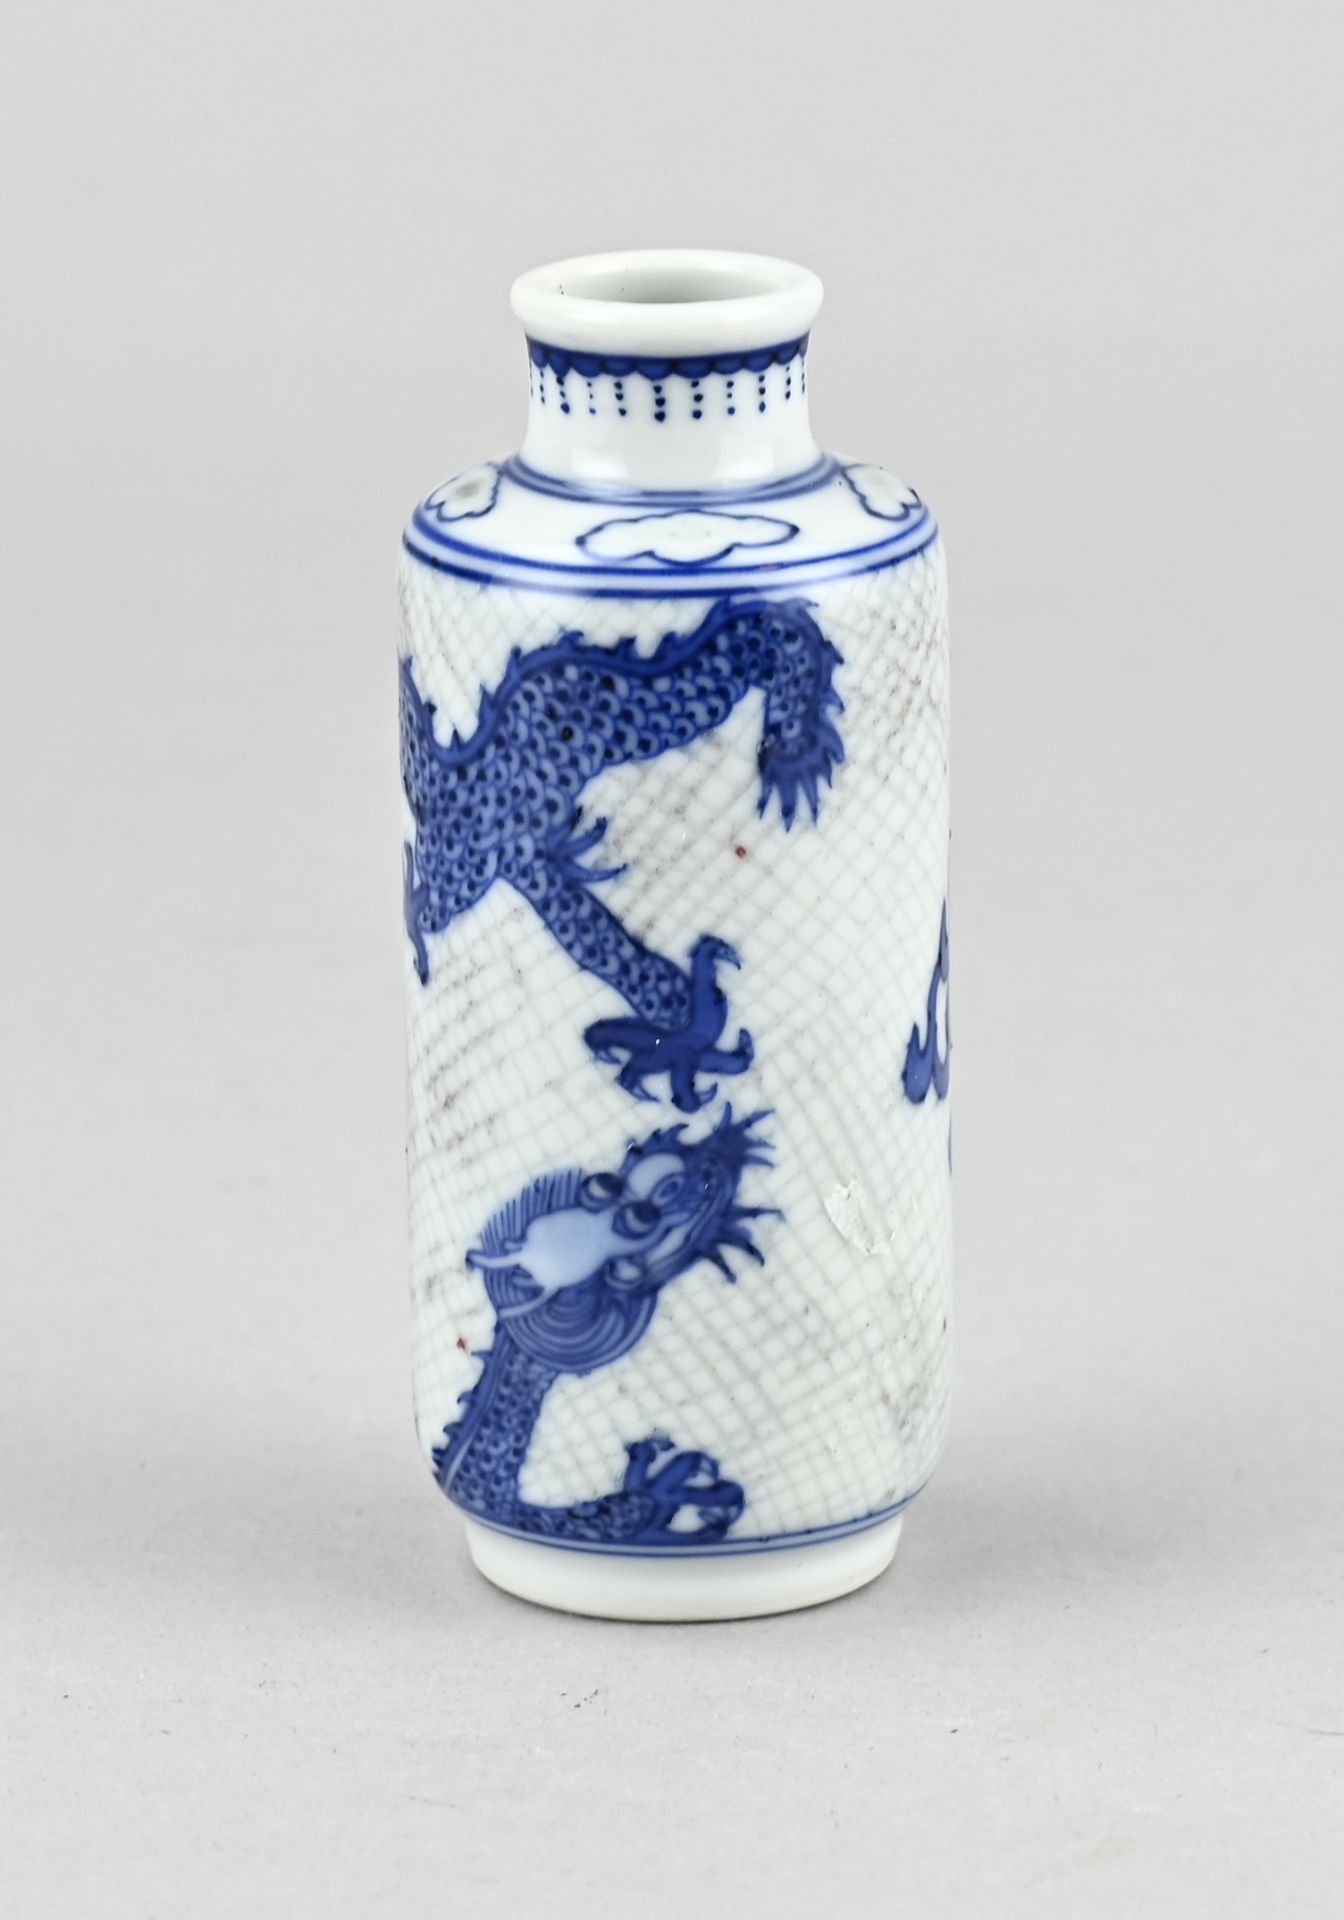 Small Chinese dragon vase - Image 2 of 3